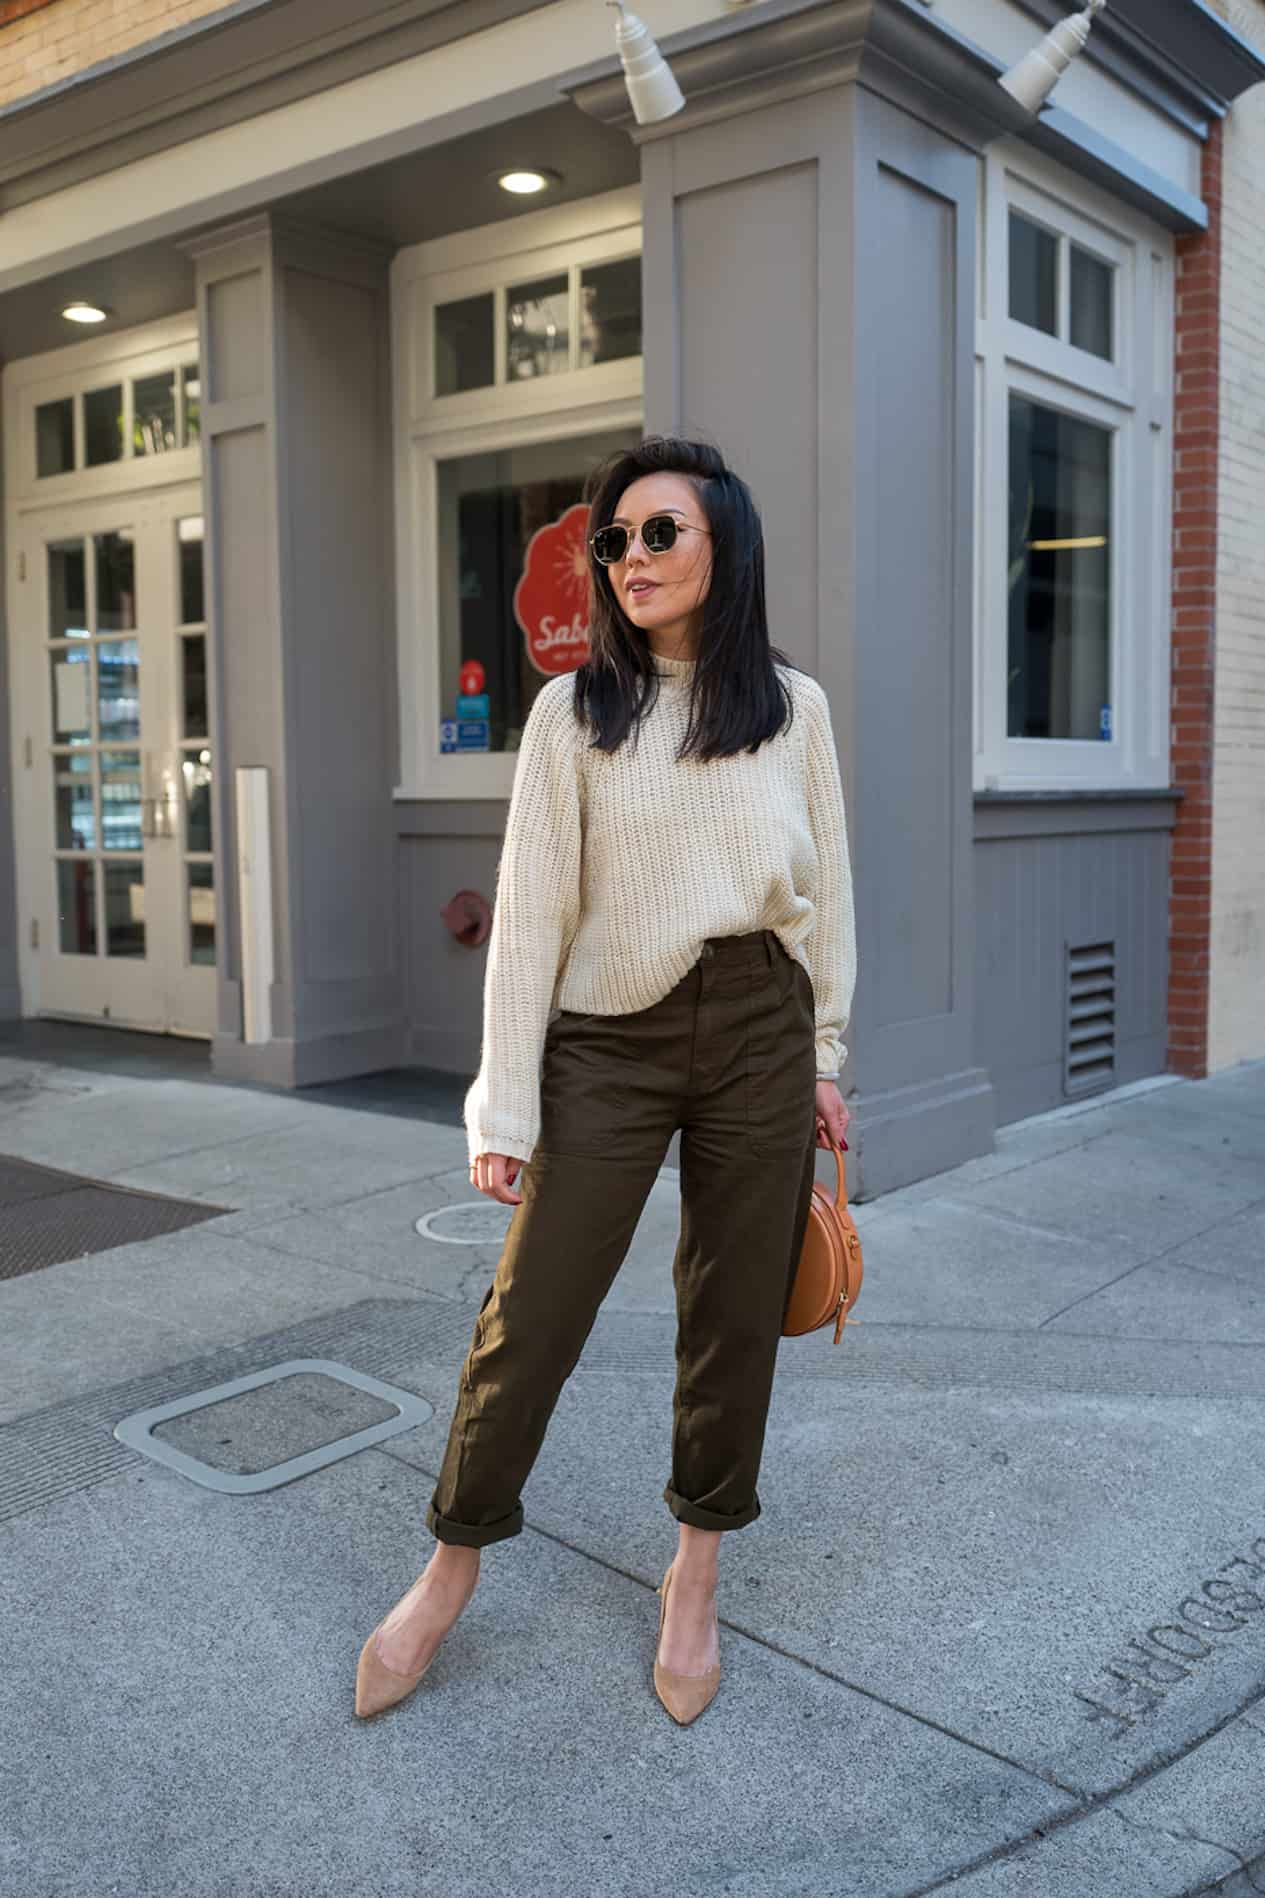 image of a woman standing on a sidewalk wearing a knit ivory sweater, green cargo pants, and a pair of nude heels